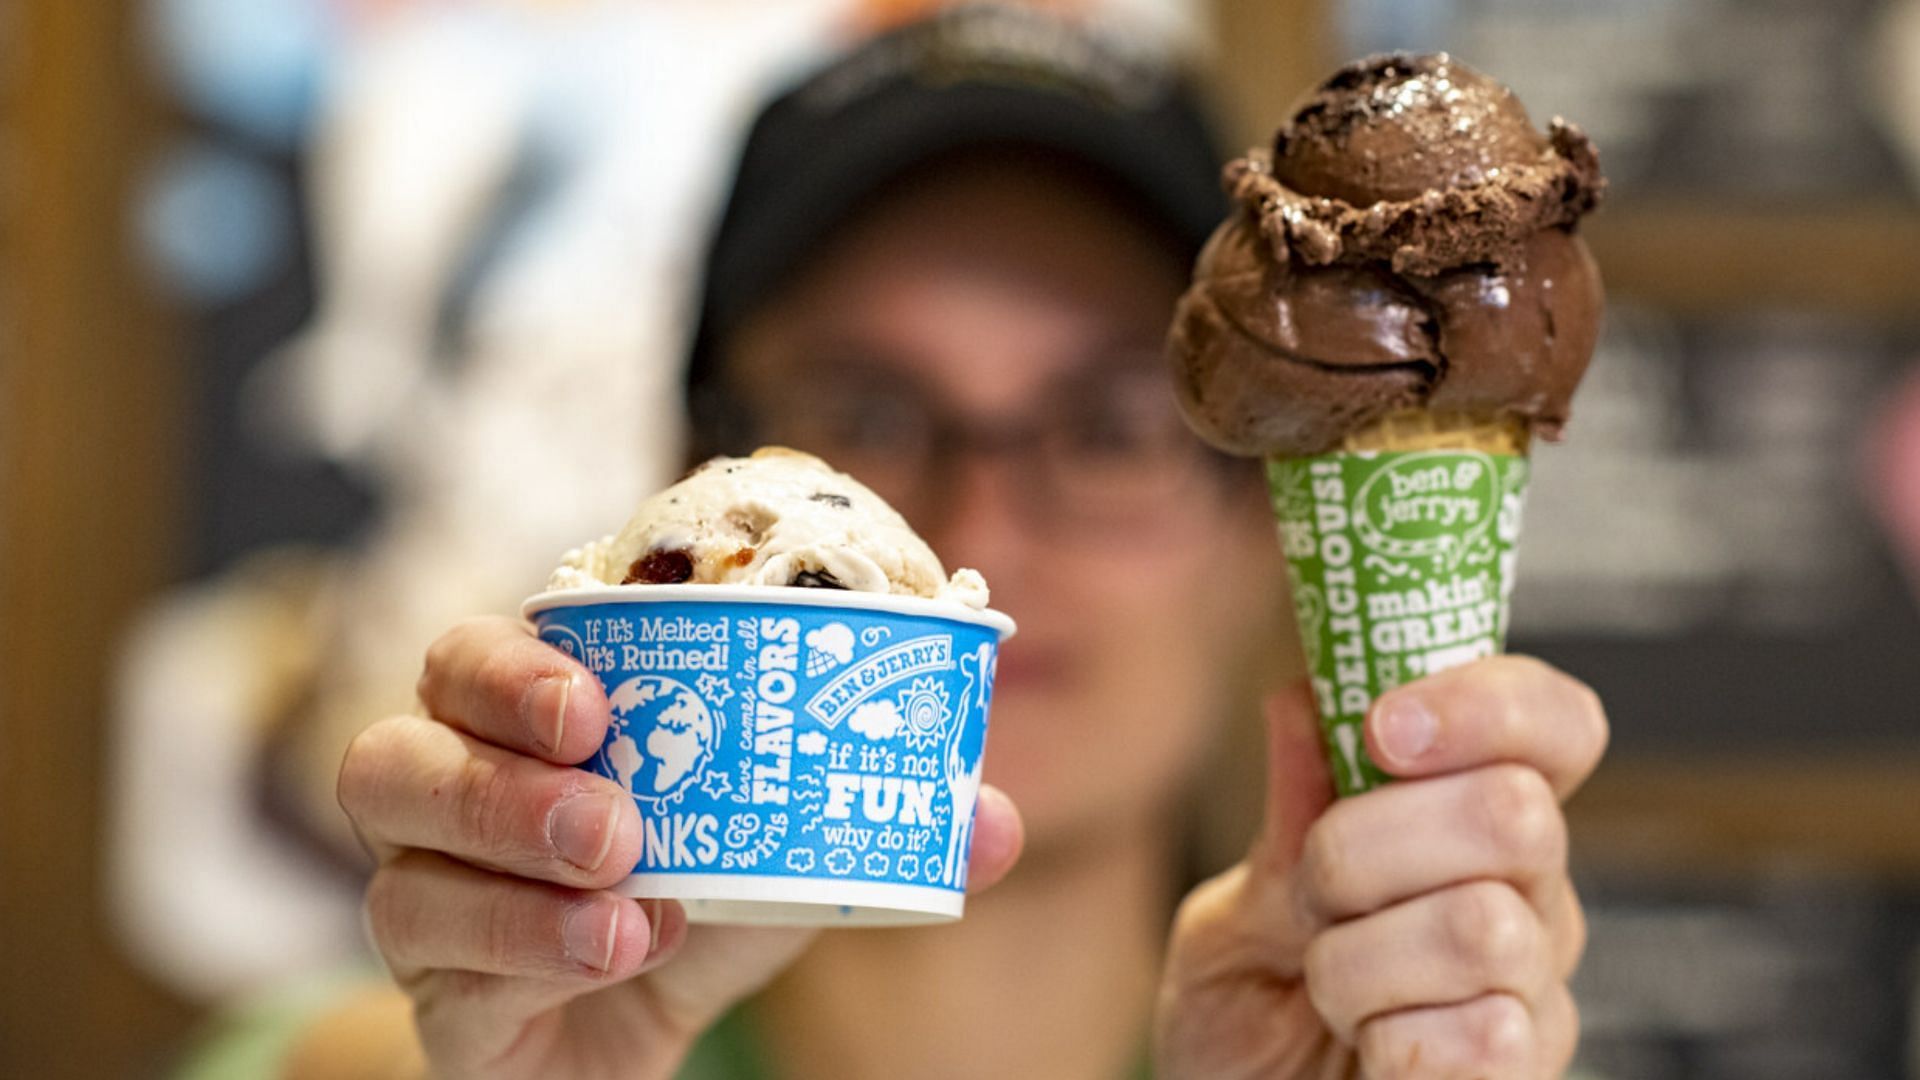 the Free Cone day returns to Ben & Jerry's after a hiatus of four years (Image via Ben & Jerry's)